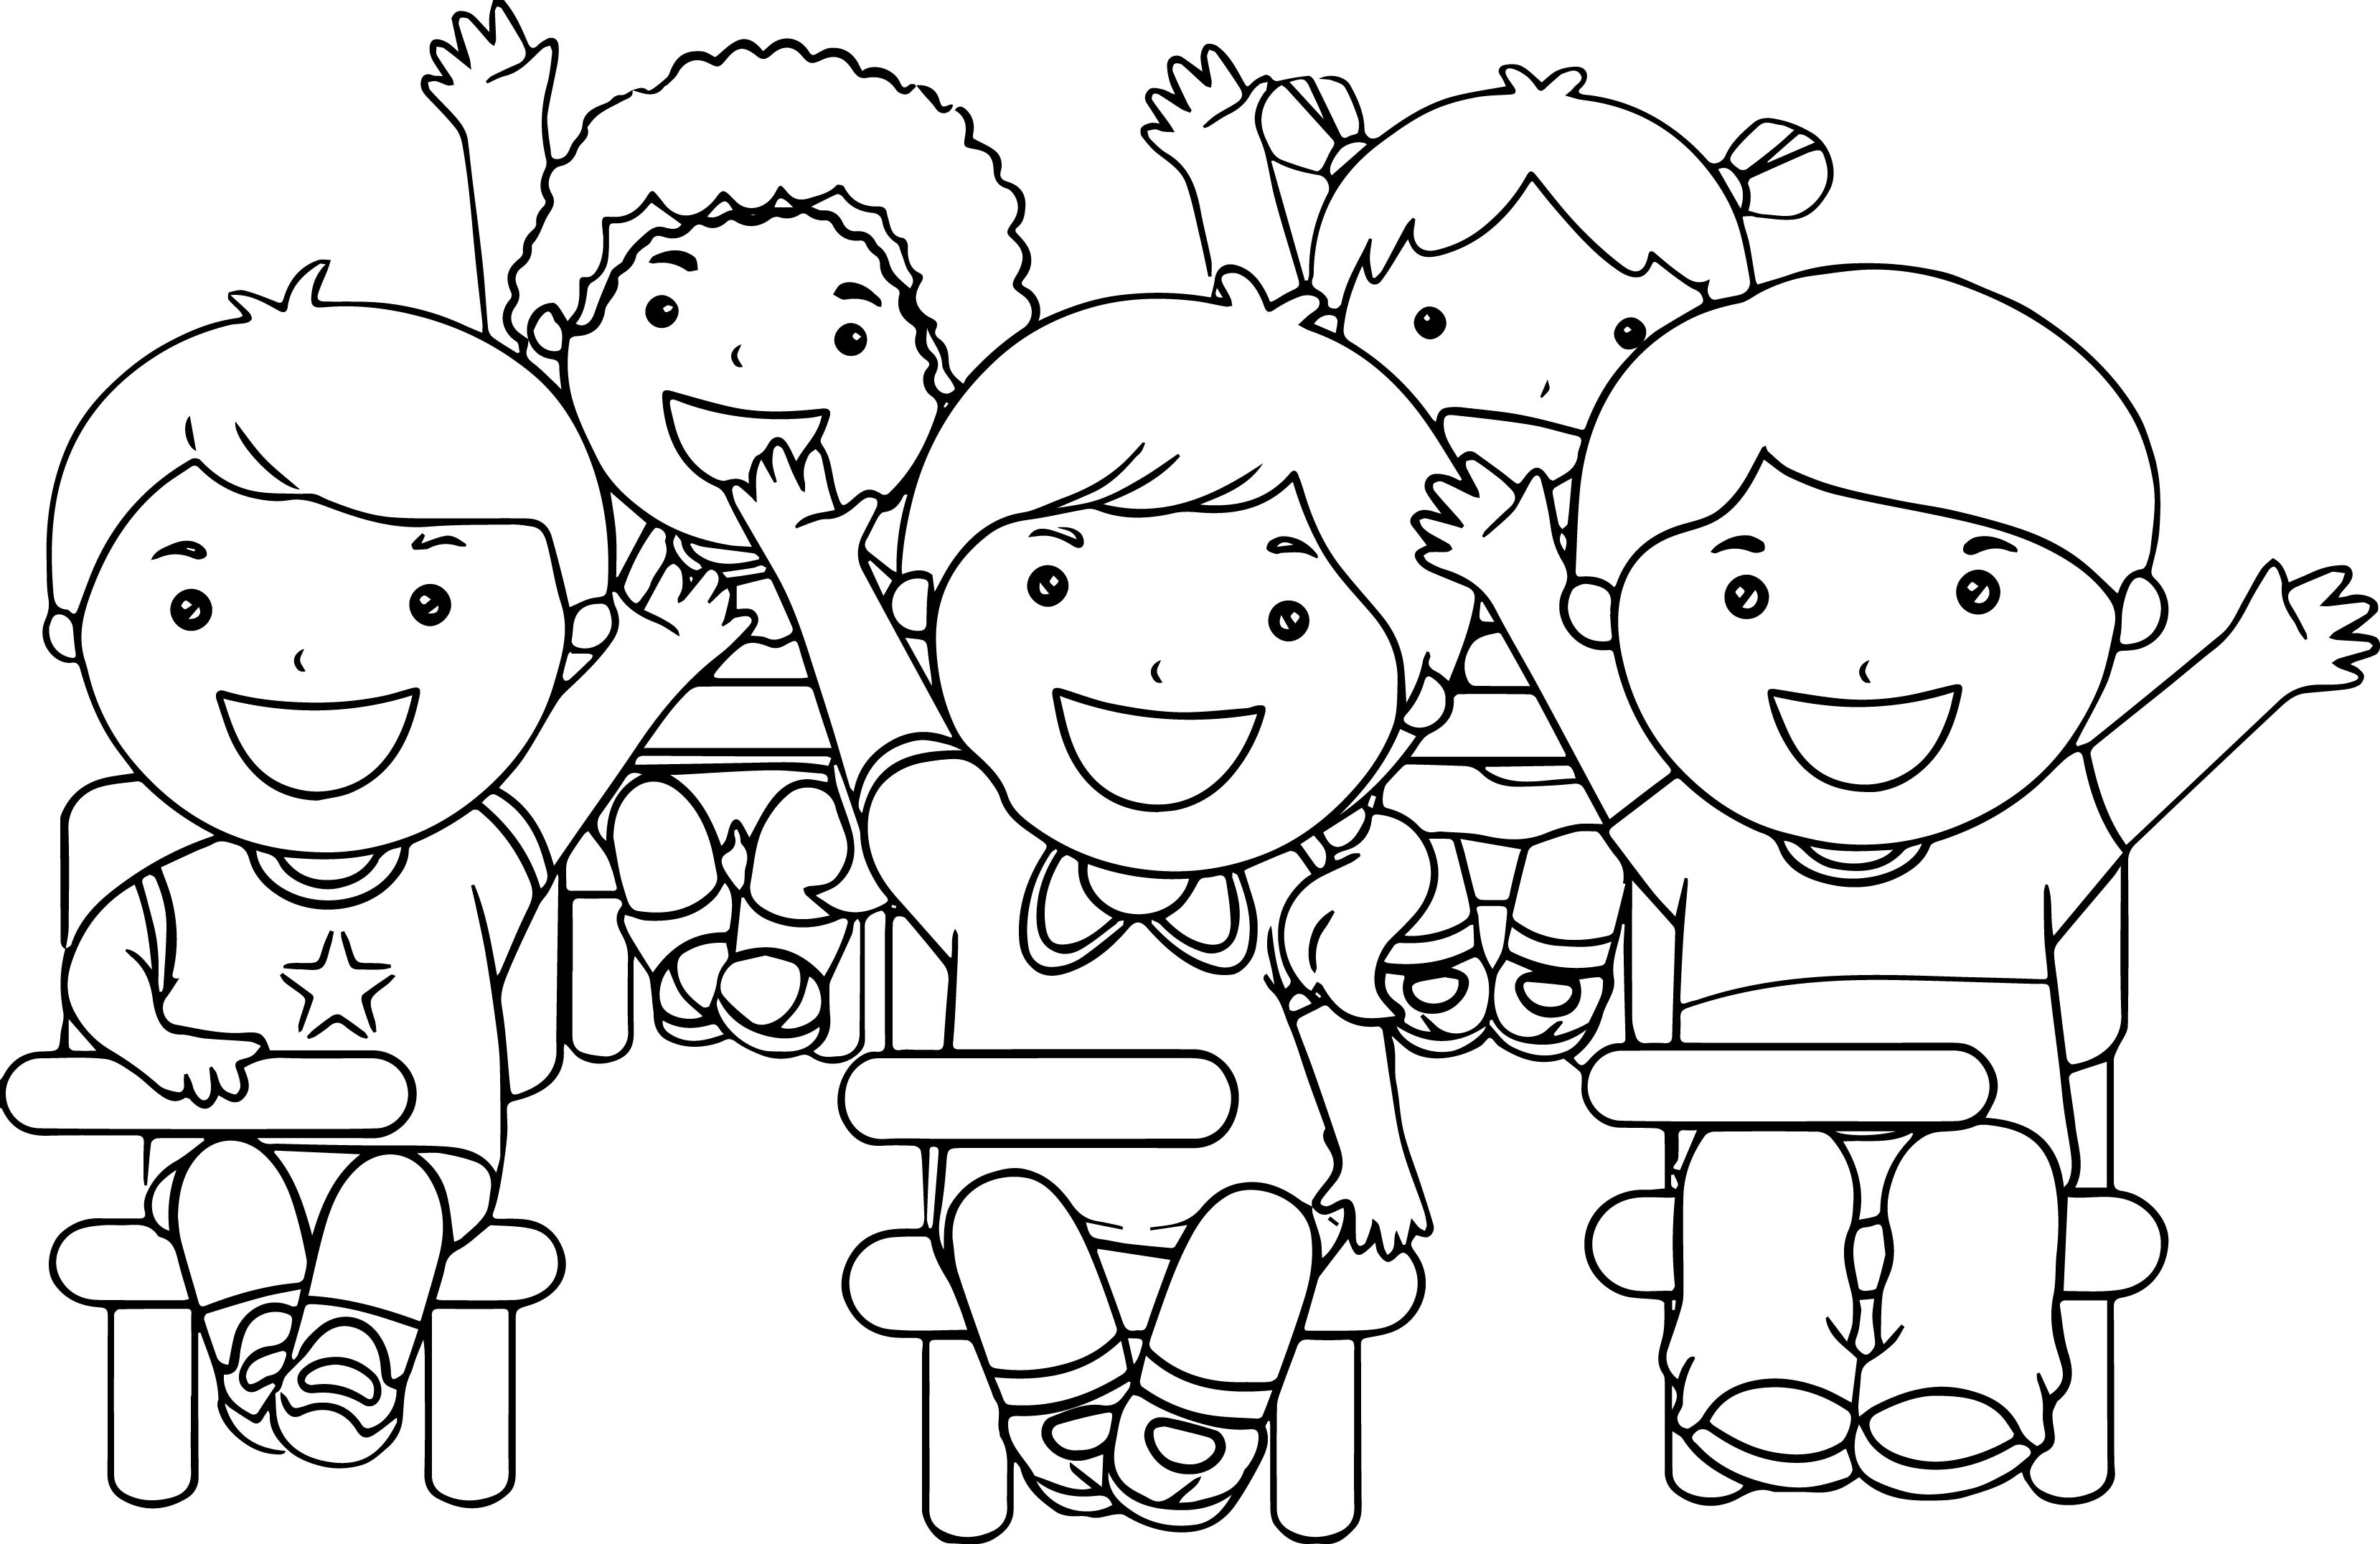 College Coloring Pages
 School Coloring Pages coloringsuite